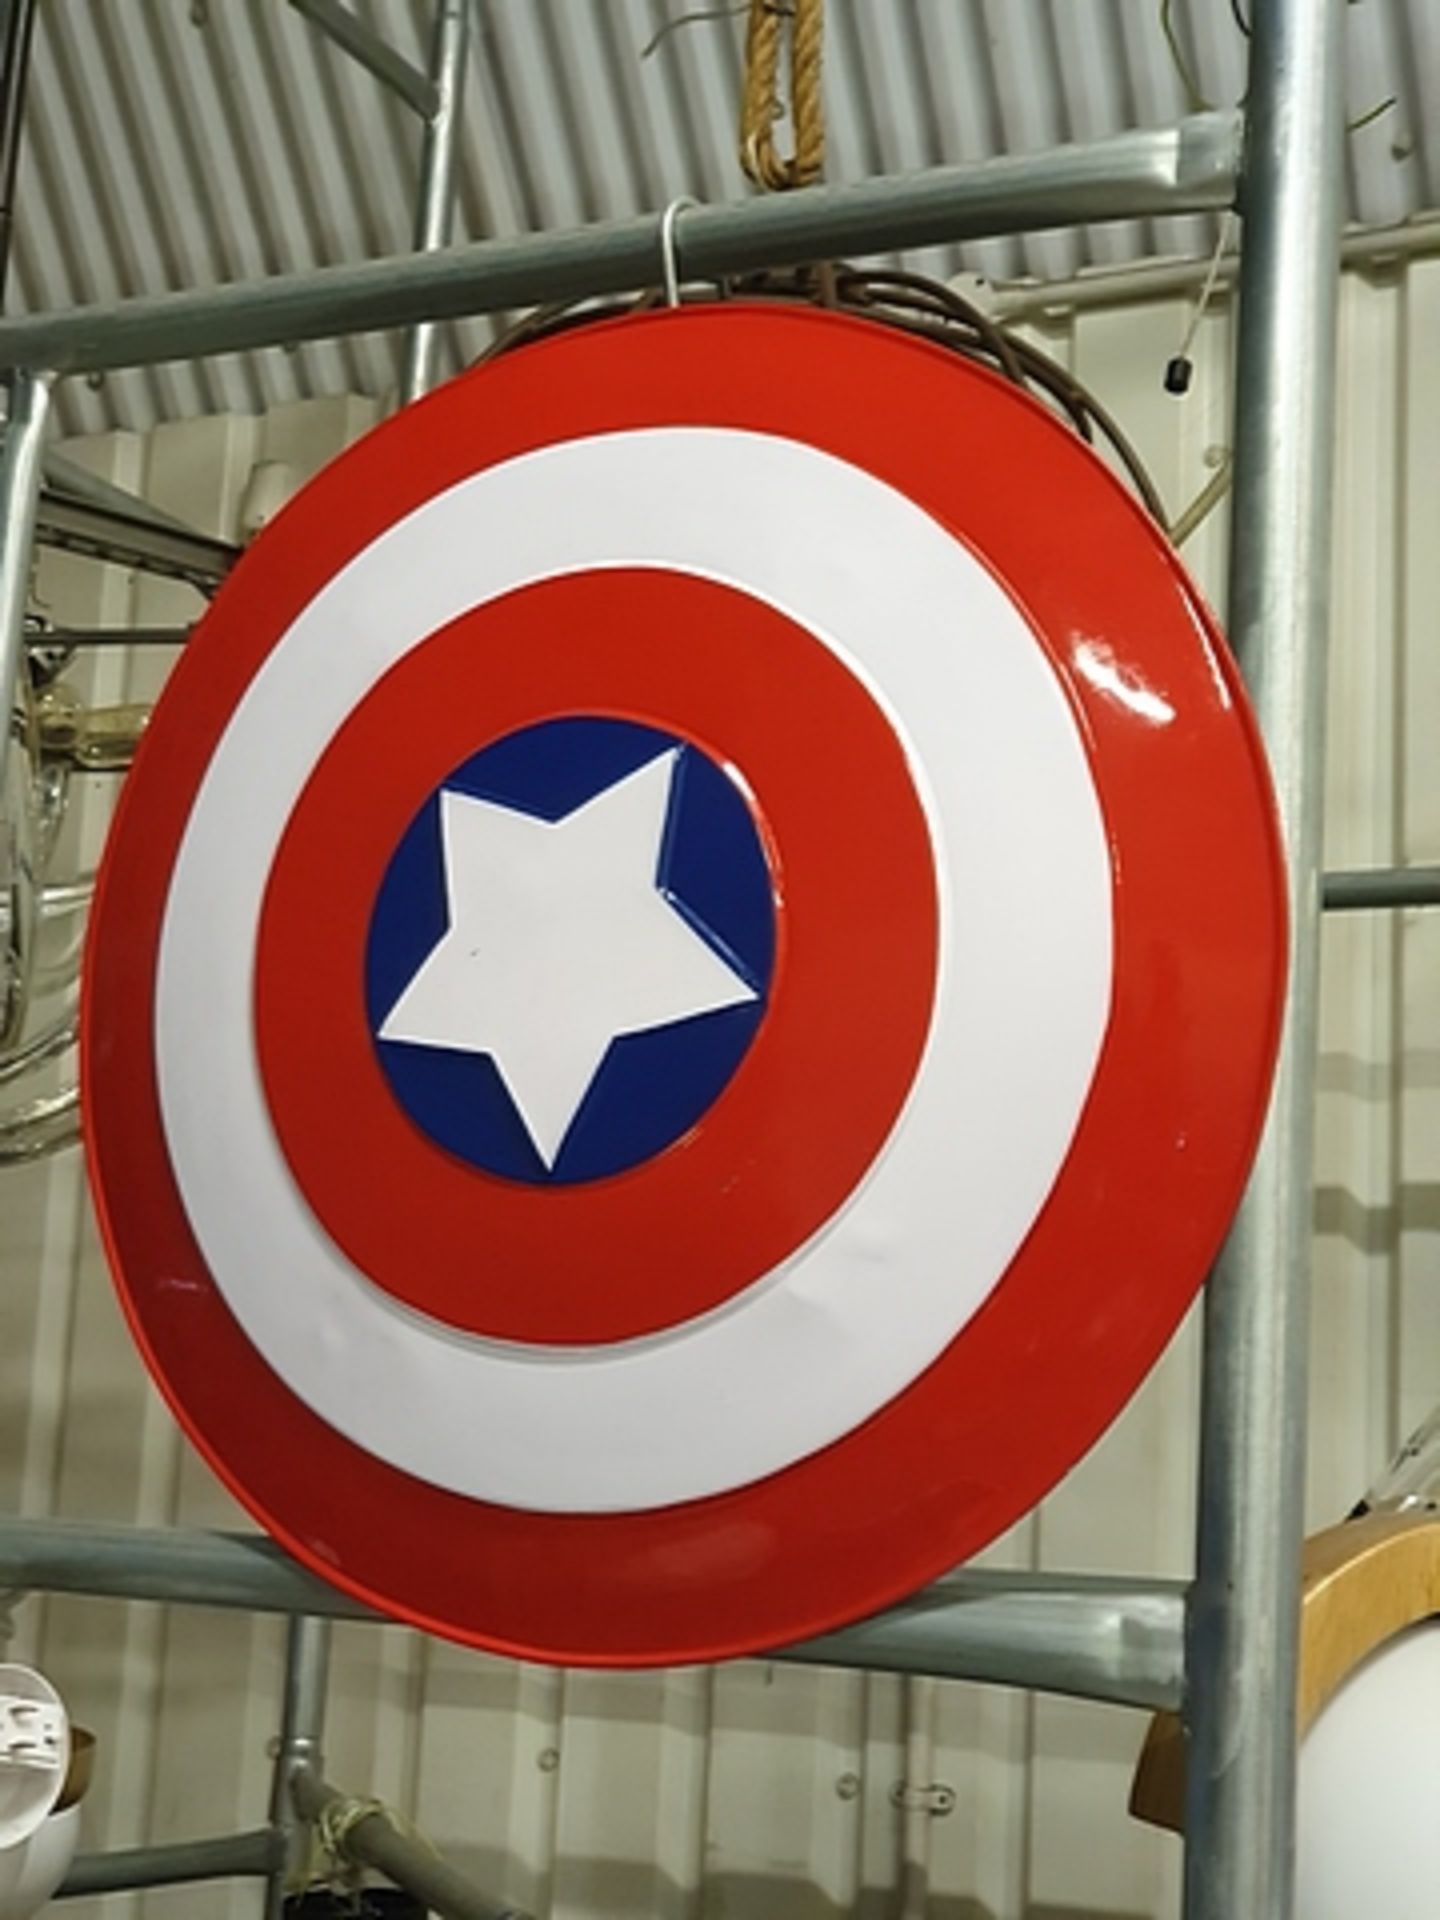 Marvel Legends Captain America Shield 24 inches in diameter and features two adjustable straps, in